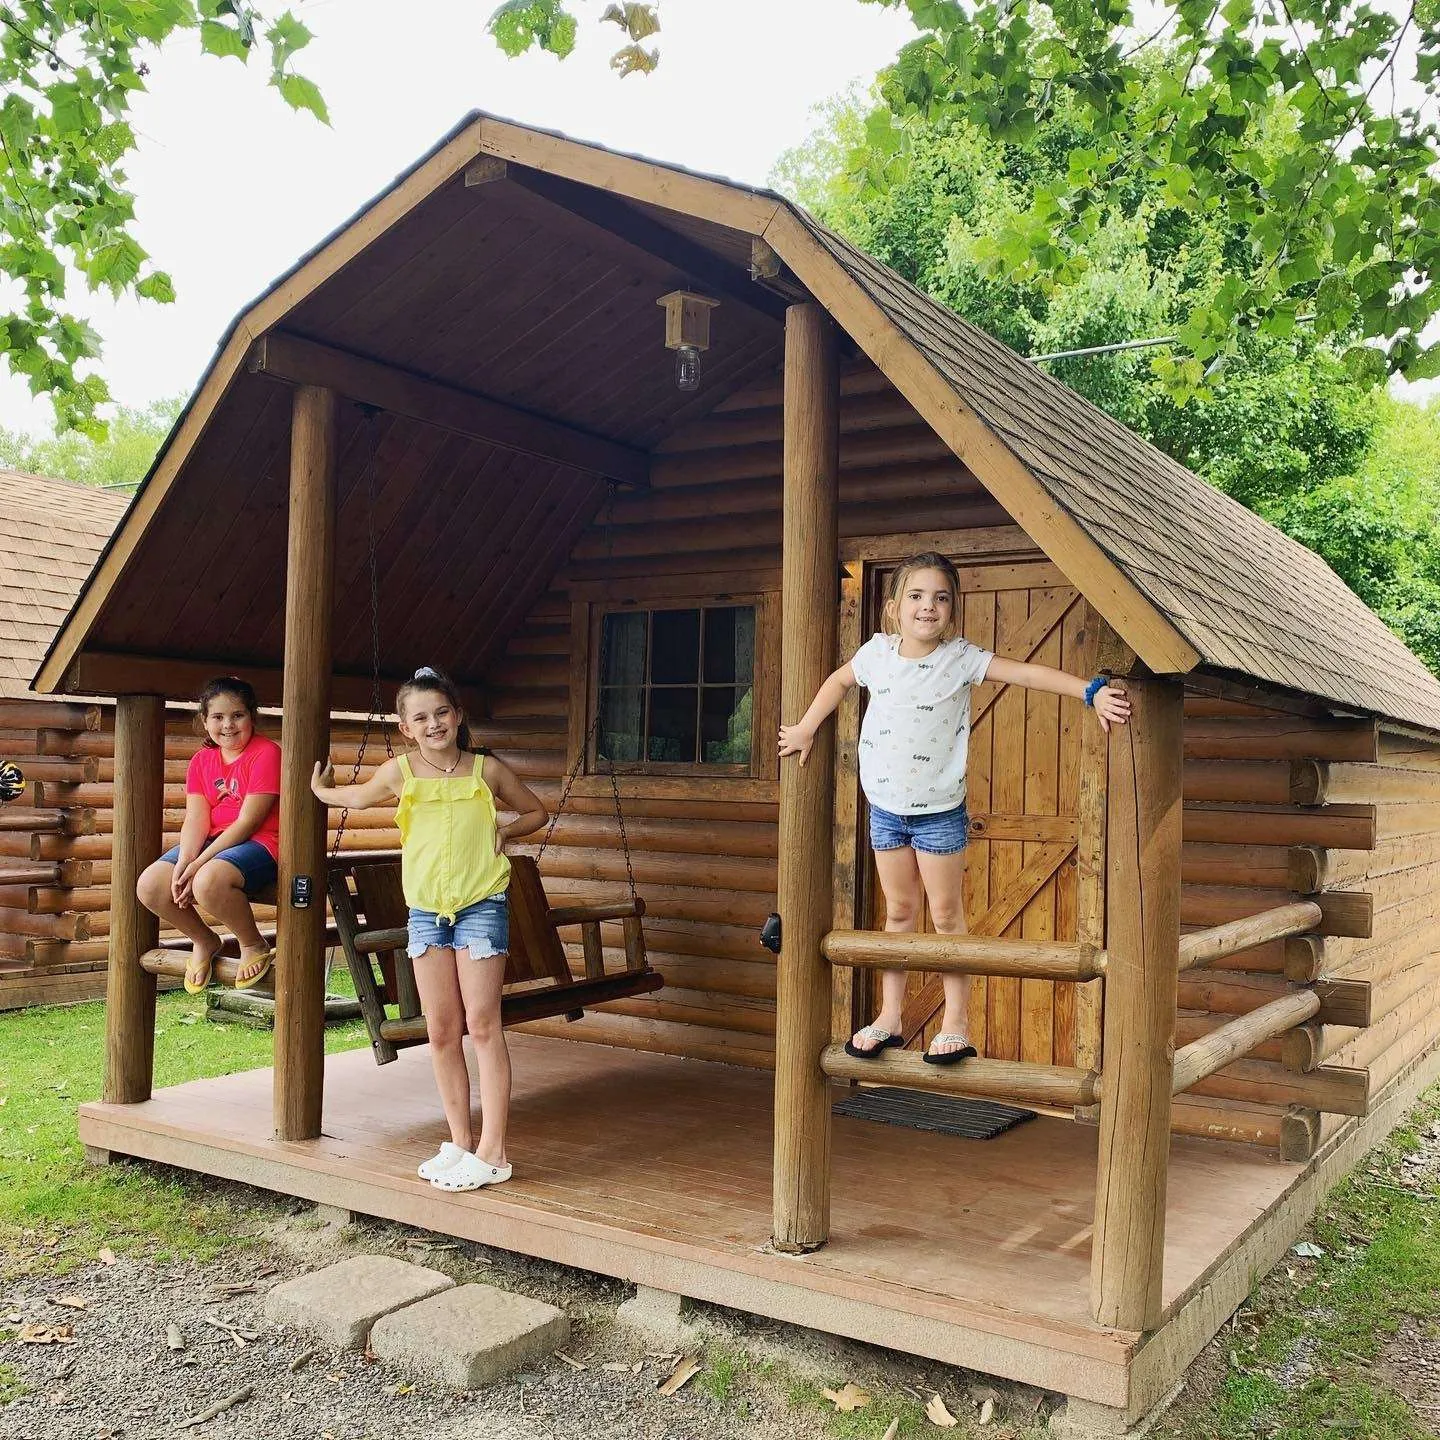 Summer camping in Asheville is the perfect way to spend time with your family!